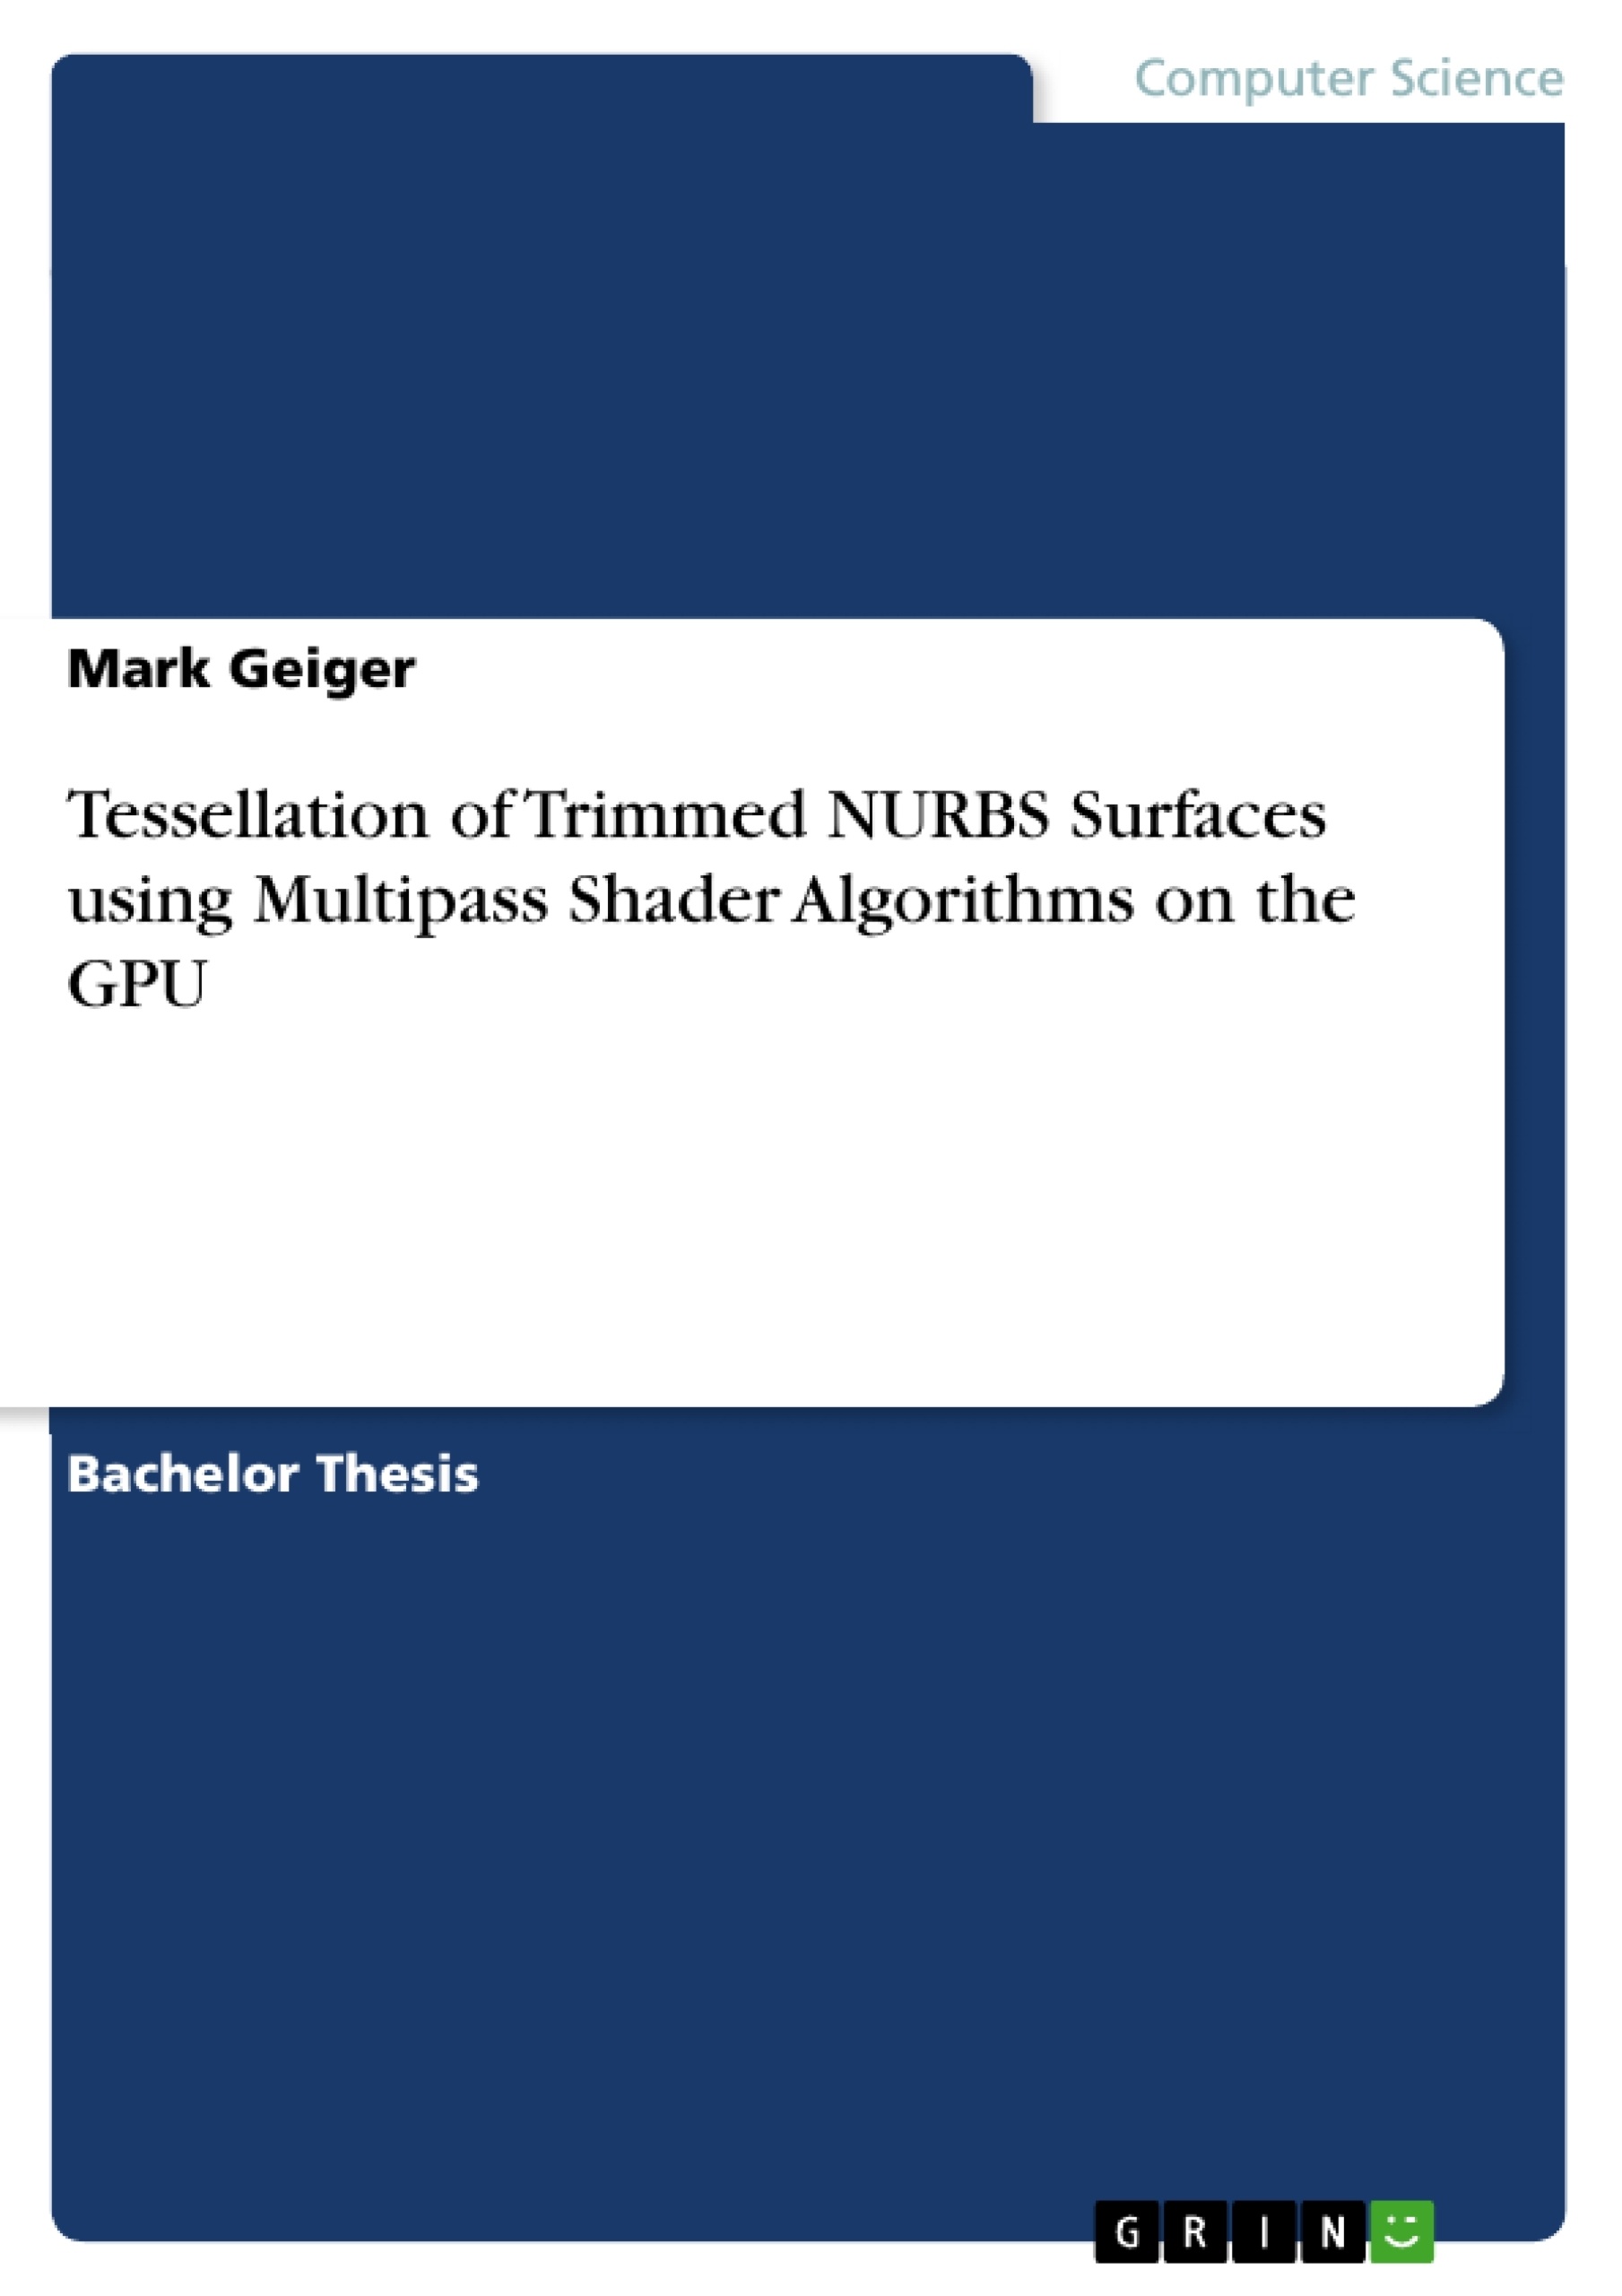 Titre: Tessellation of Trimmed NURBS Surfaces using Multipass Shader Algorithms on the GPU